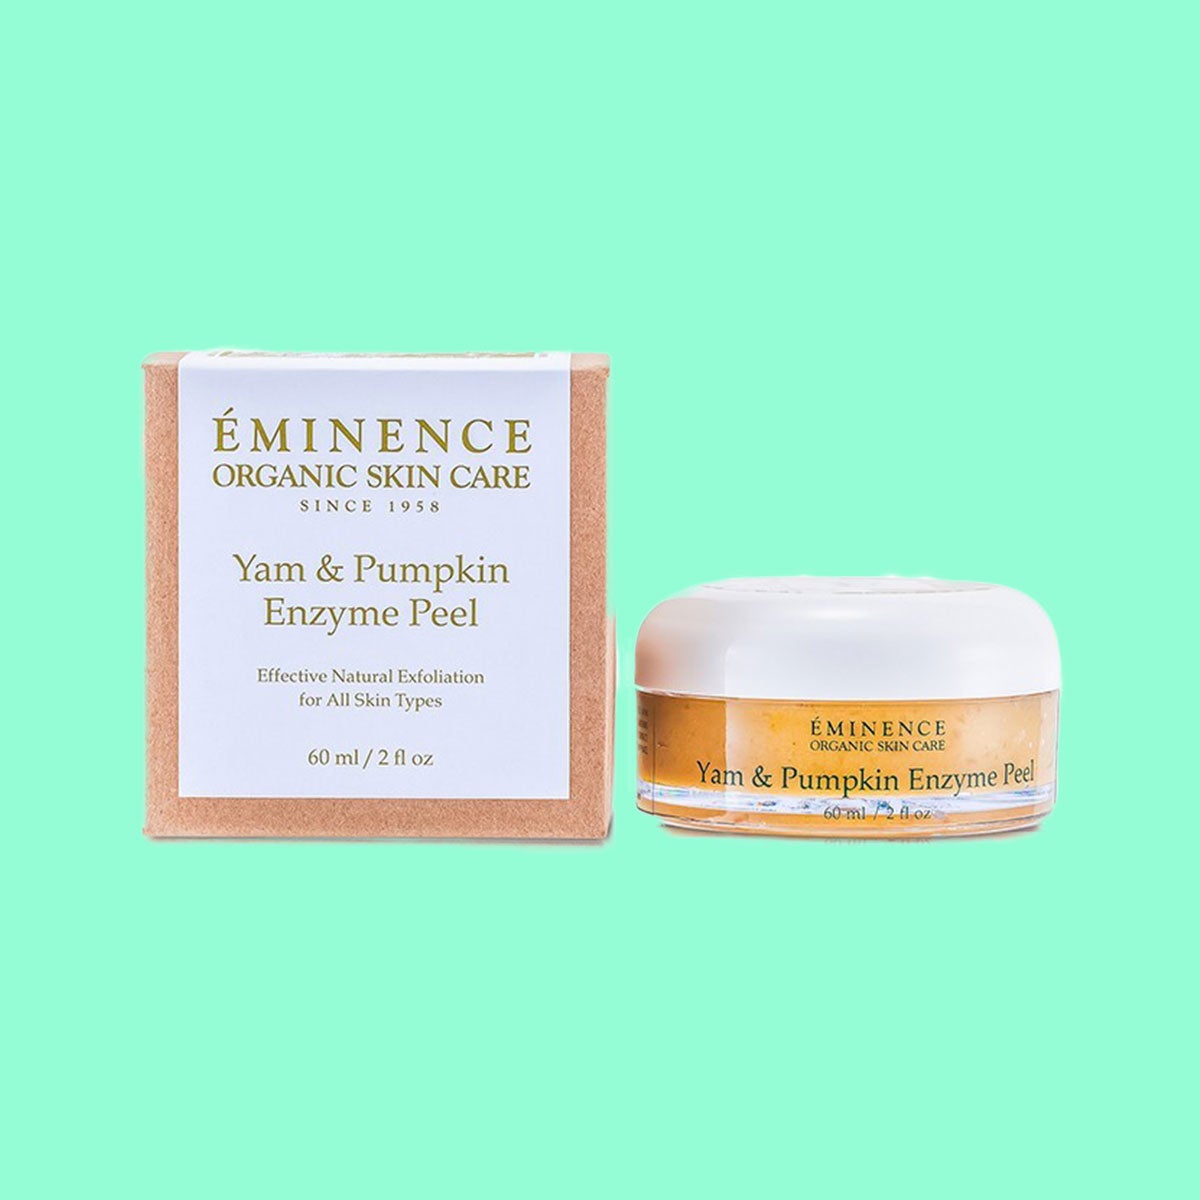 Fall In Love With These Pumpkin-Infused Beauty Products